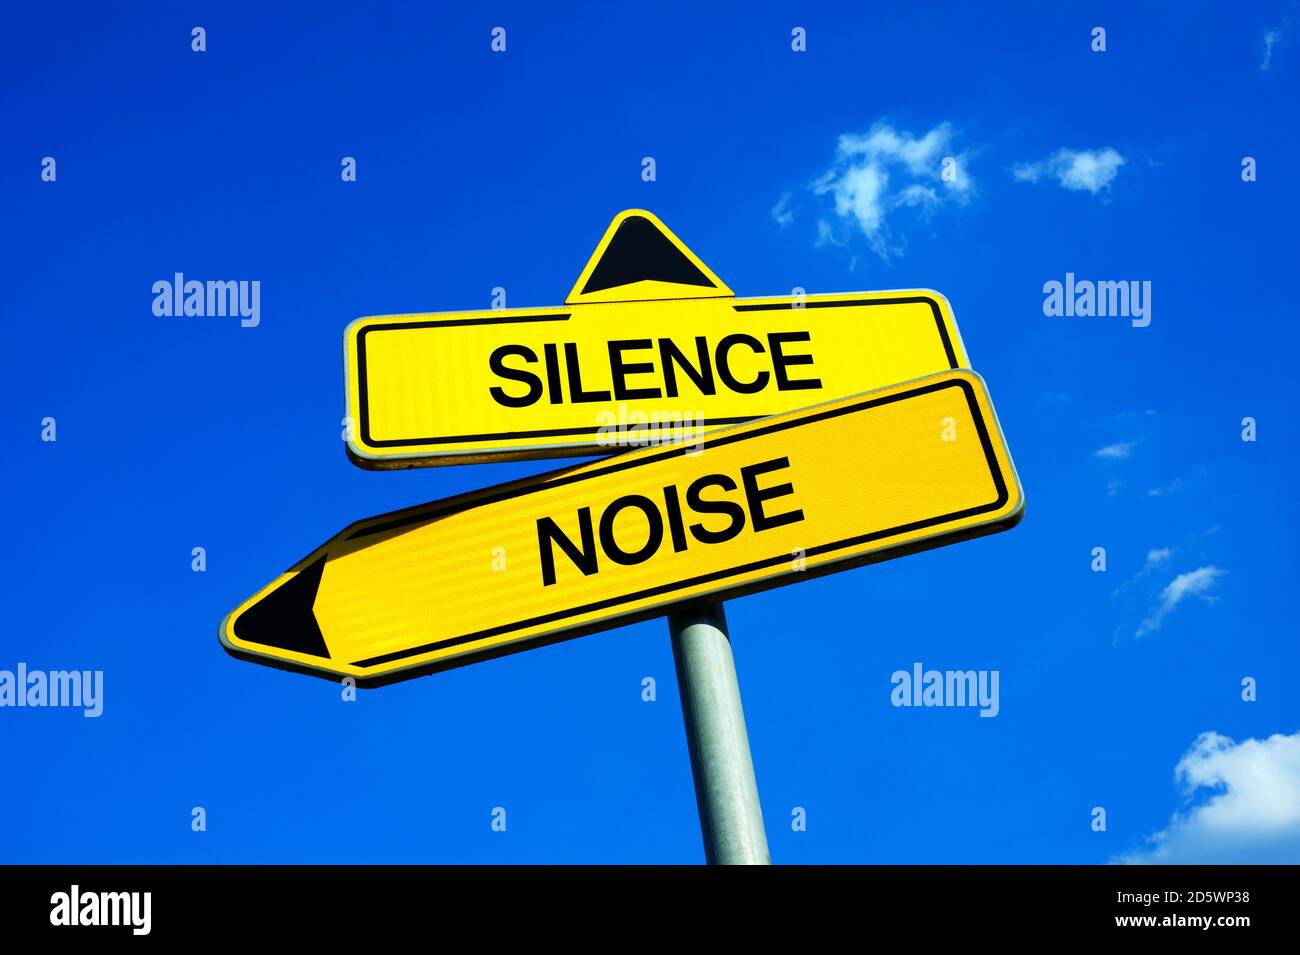 Silence vs Noise - Traffic sign with two options - quiet and calm environment vs noisy and loud surrounding. Decibels and excessive volume of sound an Stock Photo